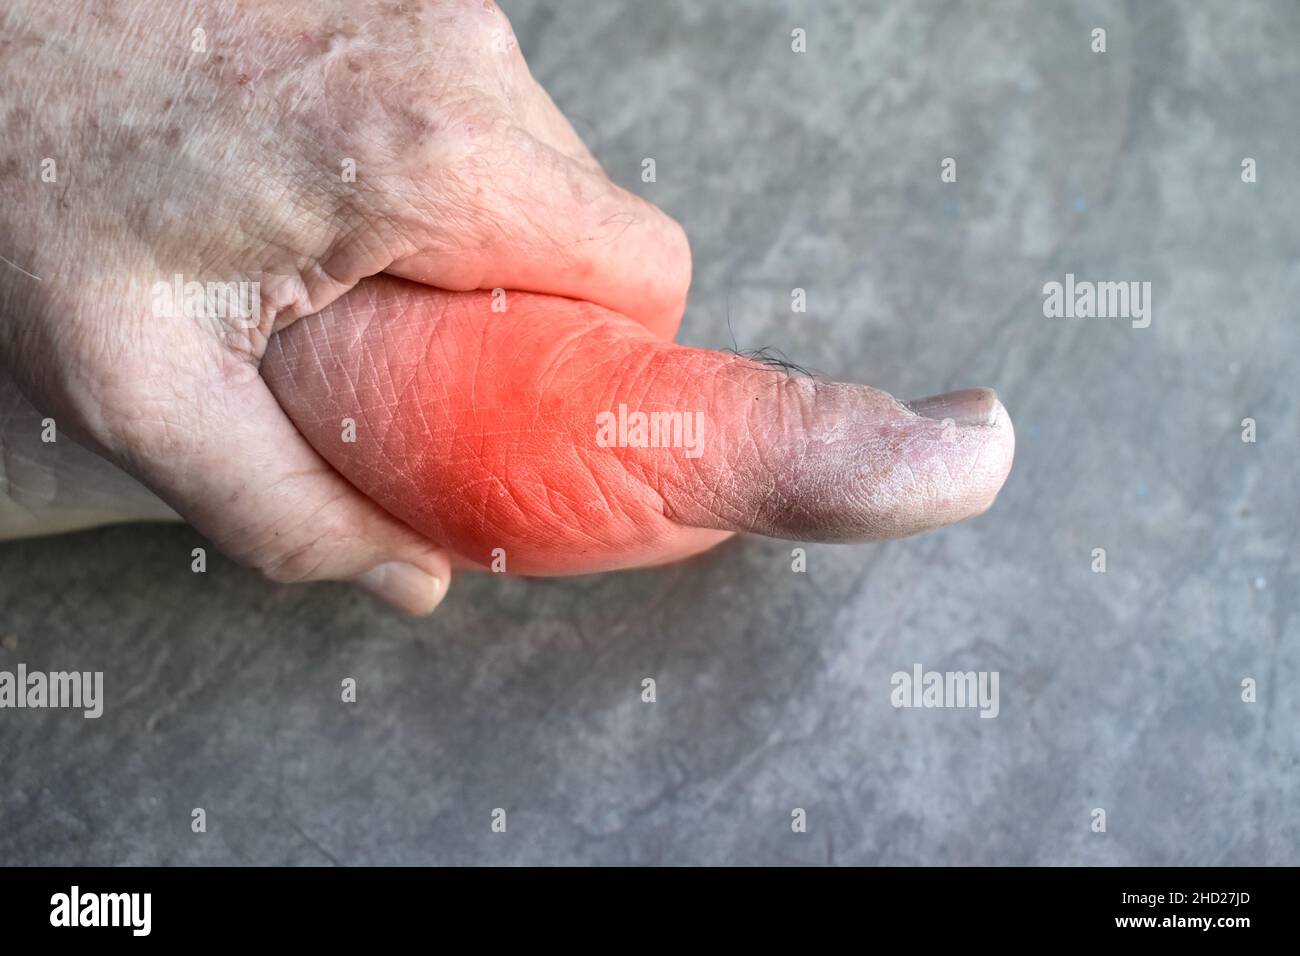 Inflammation of Asian old man’s foot. Concept of foot joint pain, arthritis, stumble, hyperuricema or gout. Stock Photo